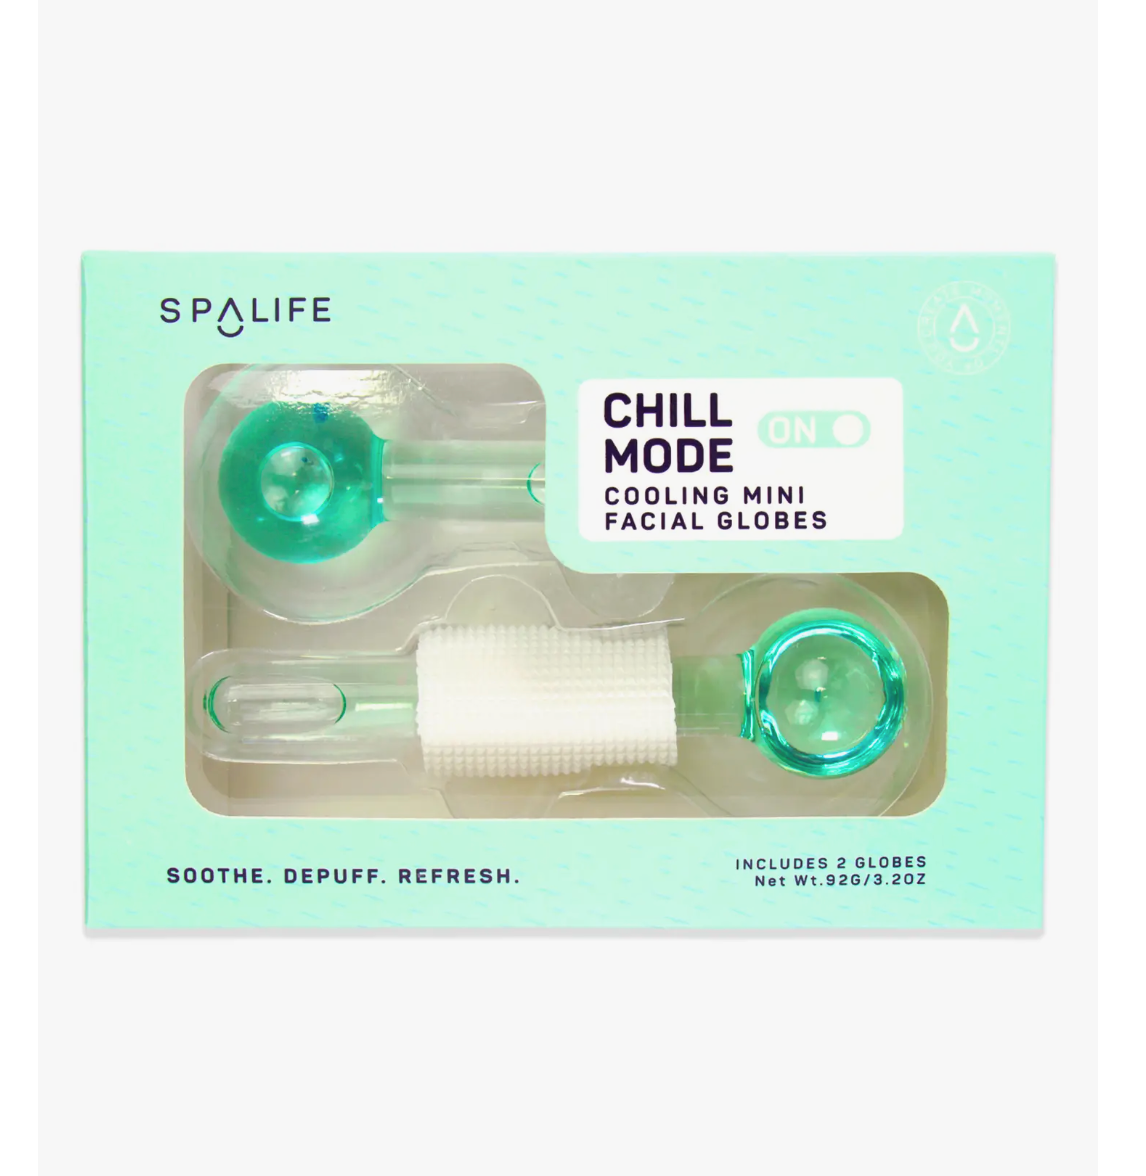 Chill Mode Cooling Mini Facial Globes - 2 Pack